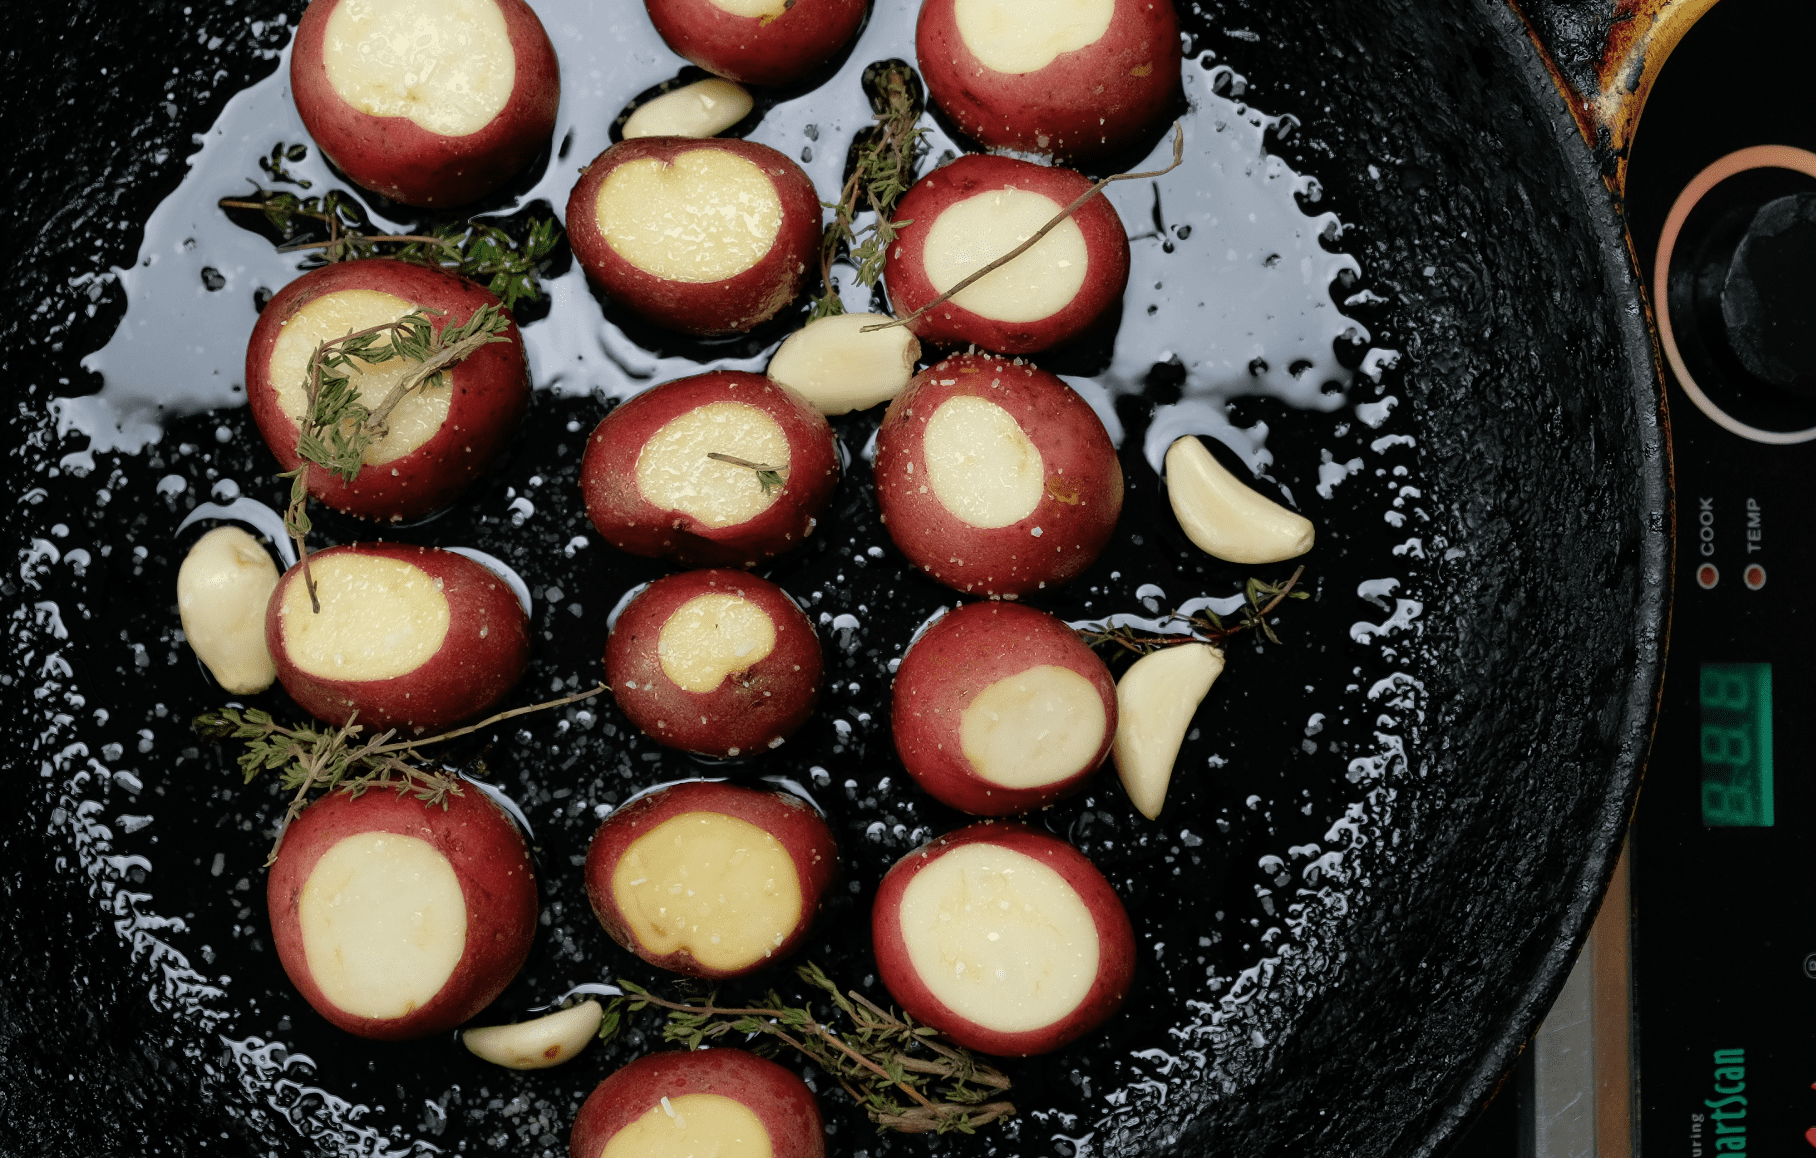 ROASTING RED BABY POTATOES WITH GARLIC AND THYME